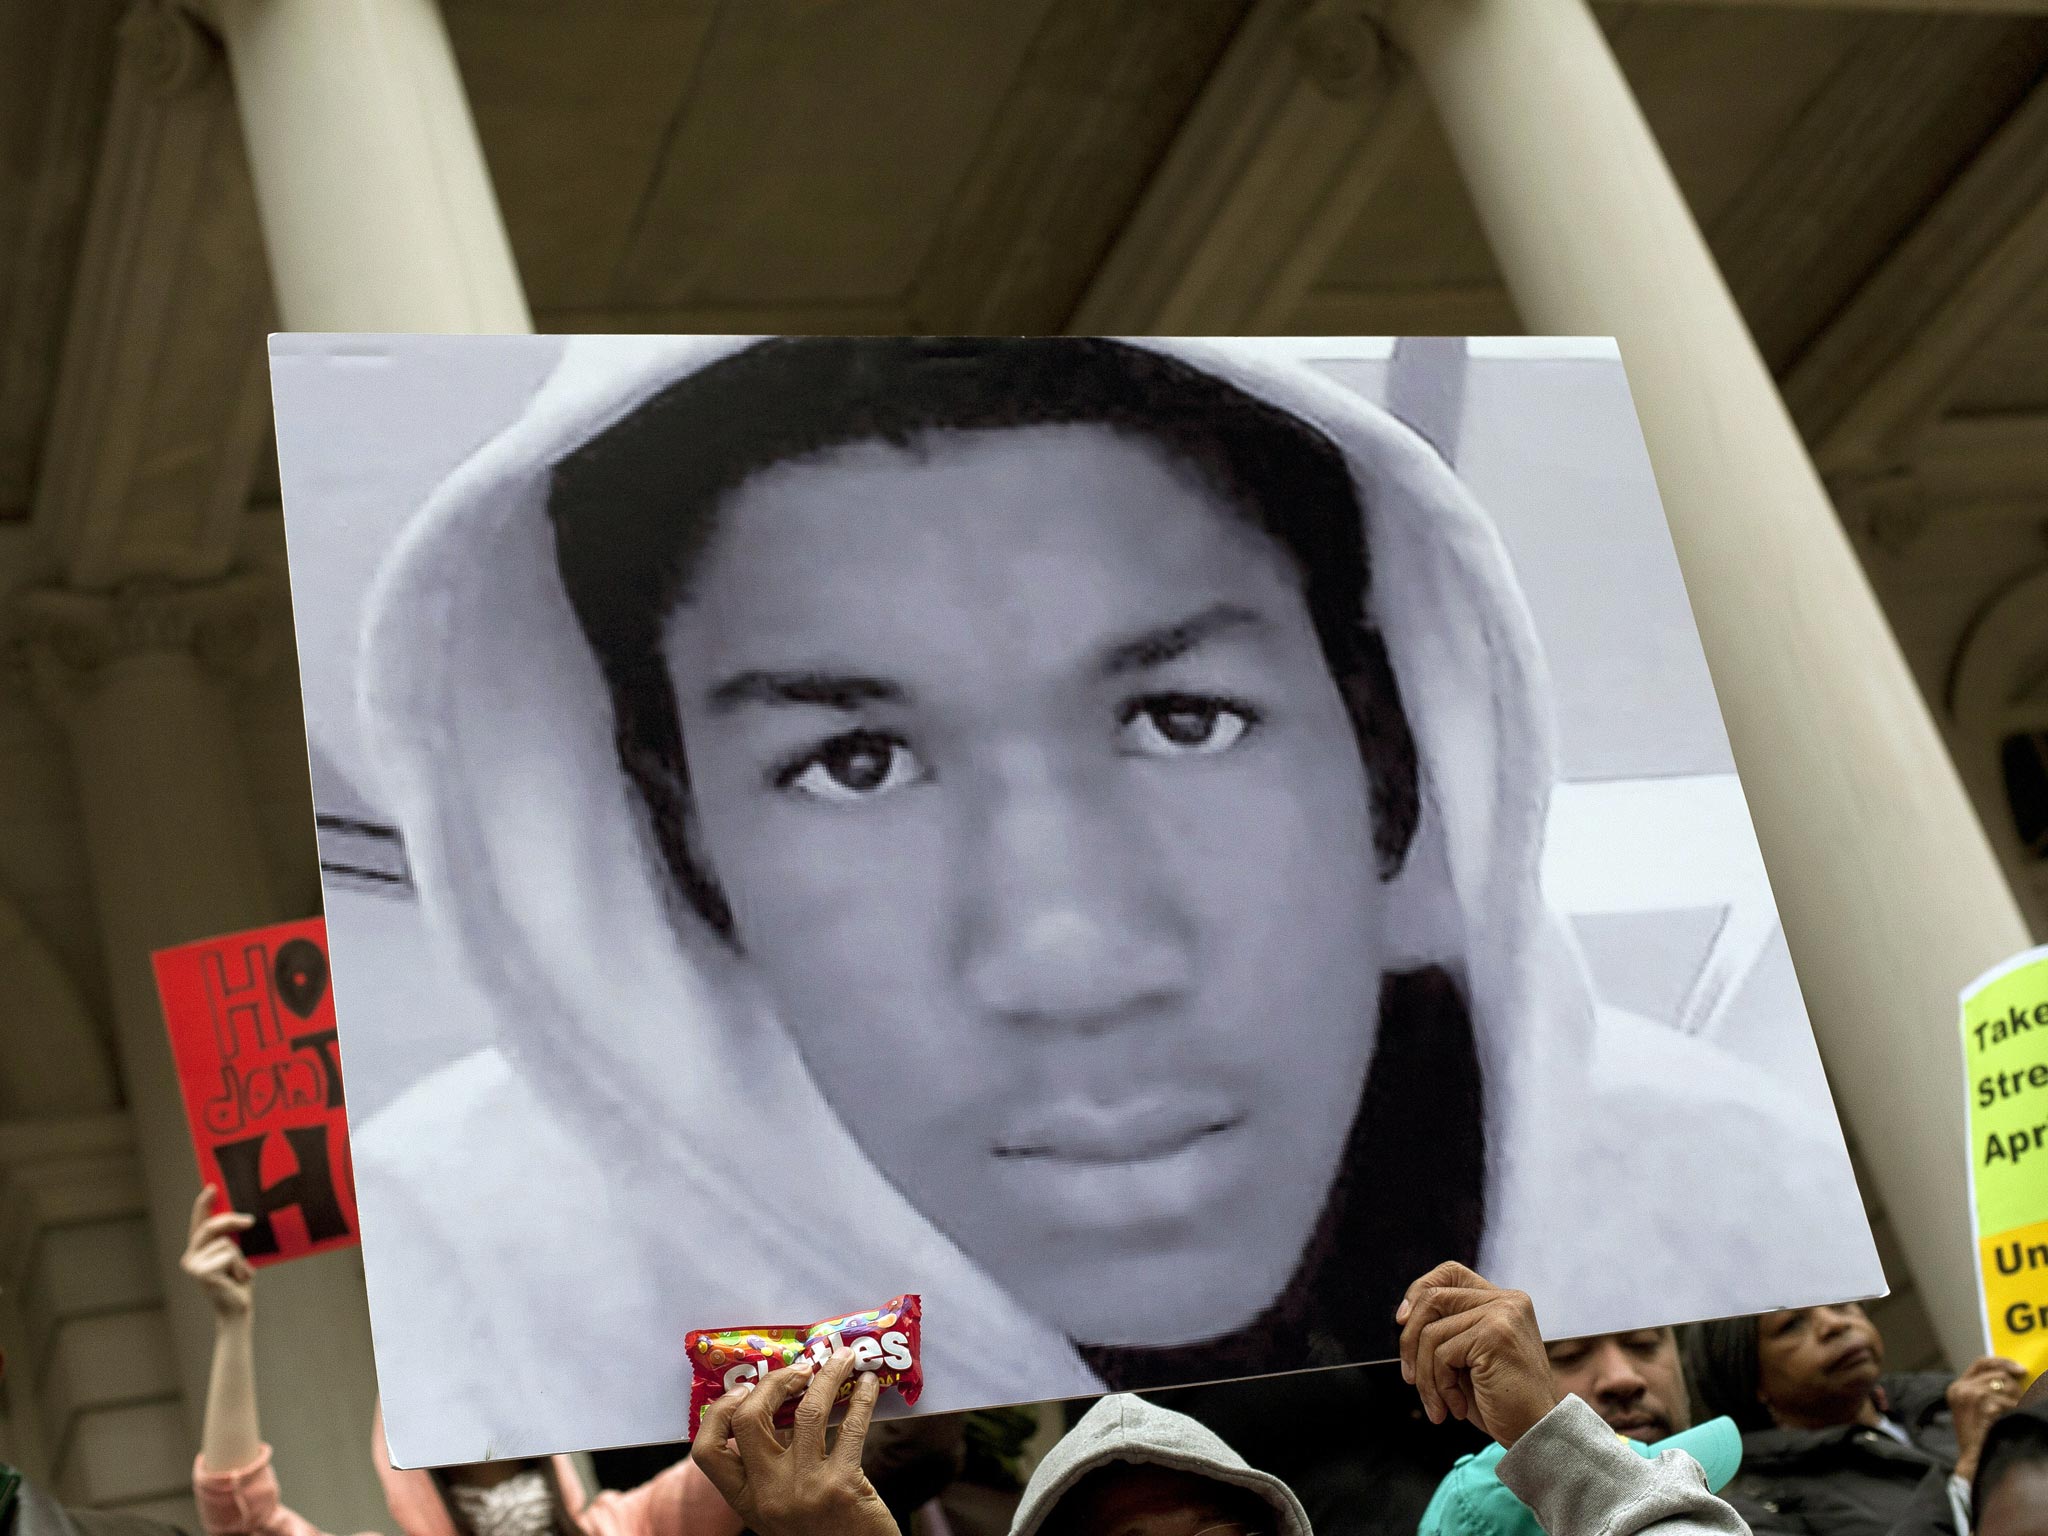 A poster of 17-year-old Trayvon Martin, who was killed in Sanford, Florida in 2012